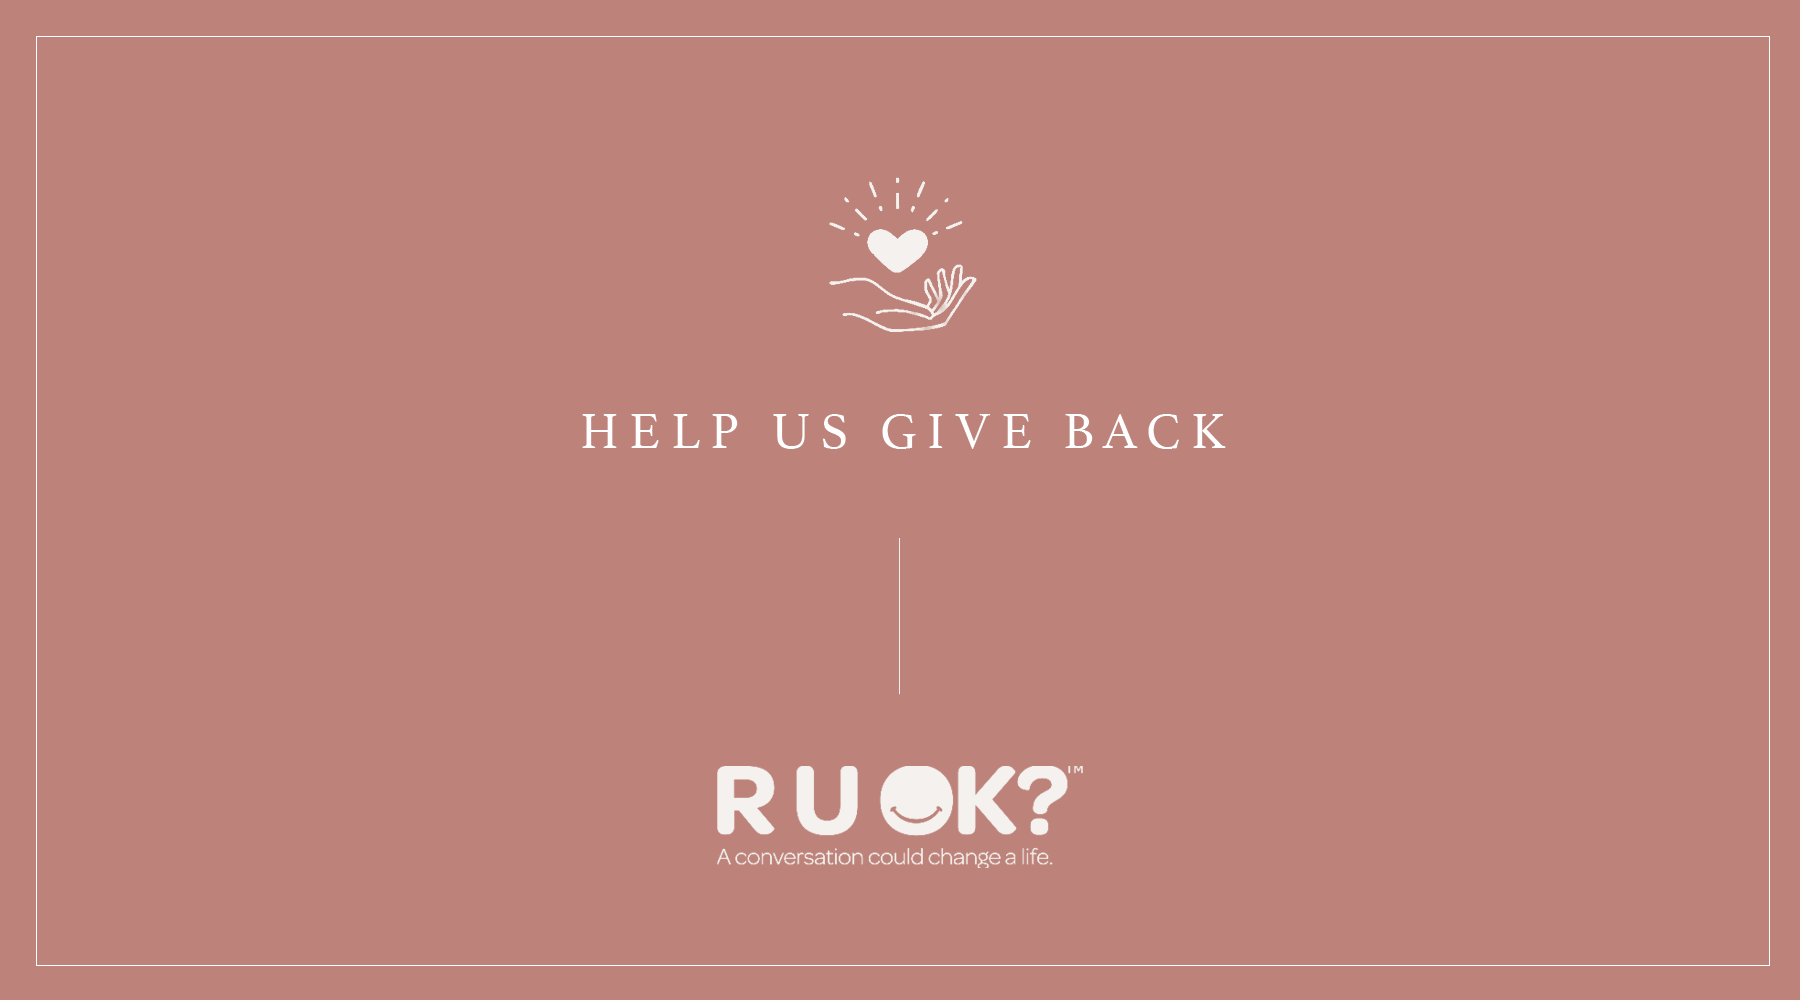 Giving back with R U OK DAY